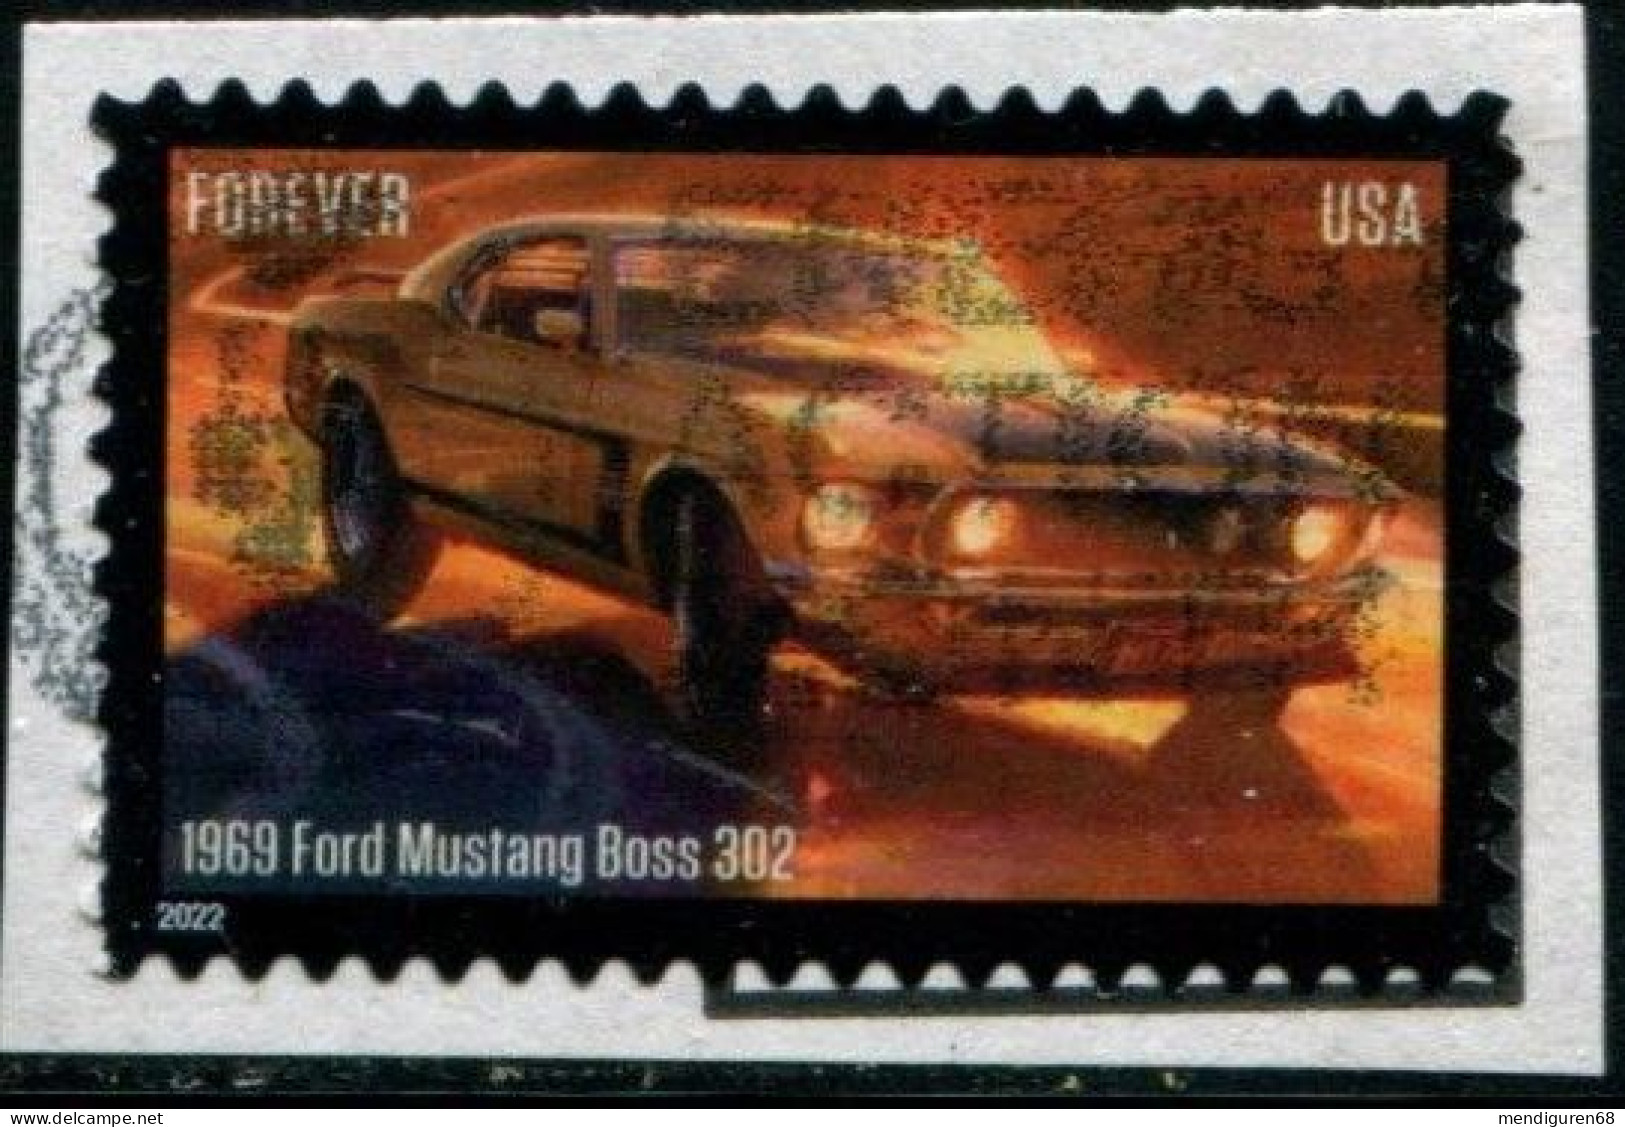 VEREINIGTE STAATEN ETATS UNIS USA 2022 PONY CARS: 1969 FORD MUSTANG BOSS 302 USED ON PAPER SN 5715 - Gebraucht